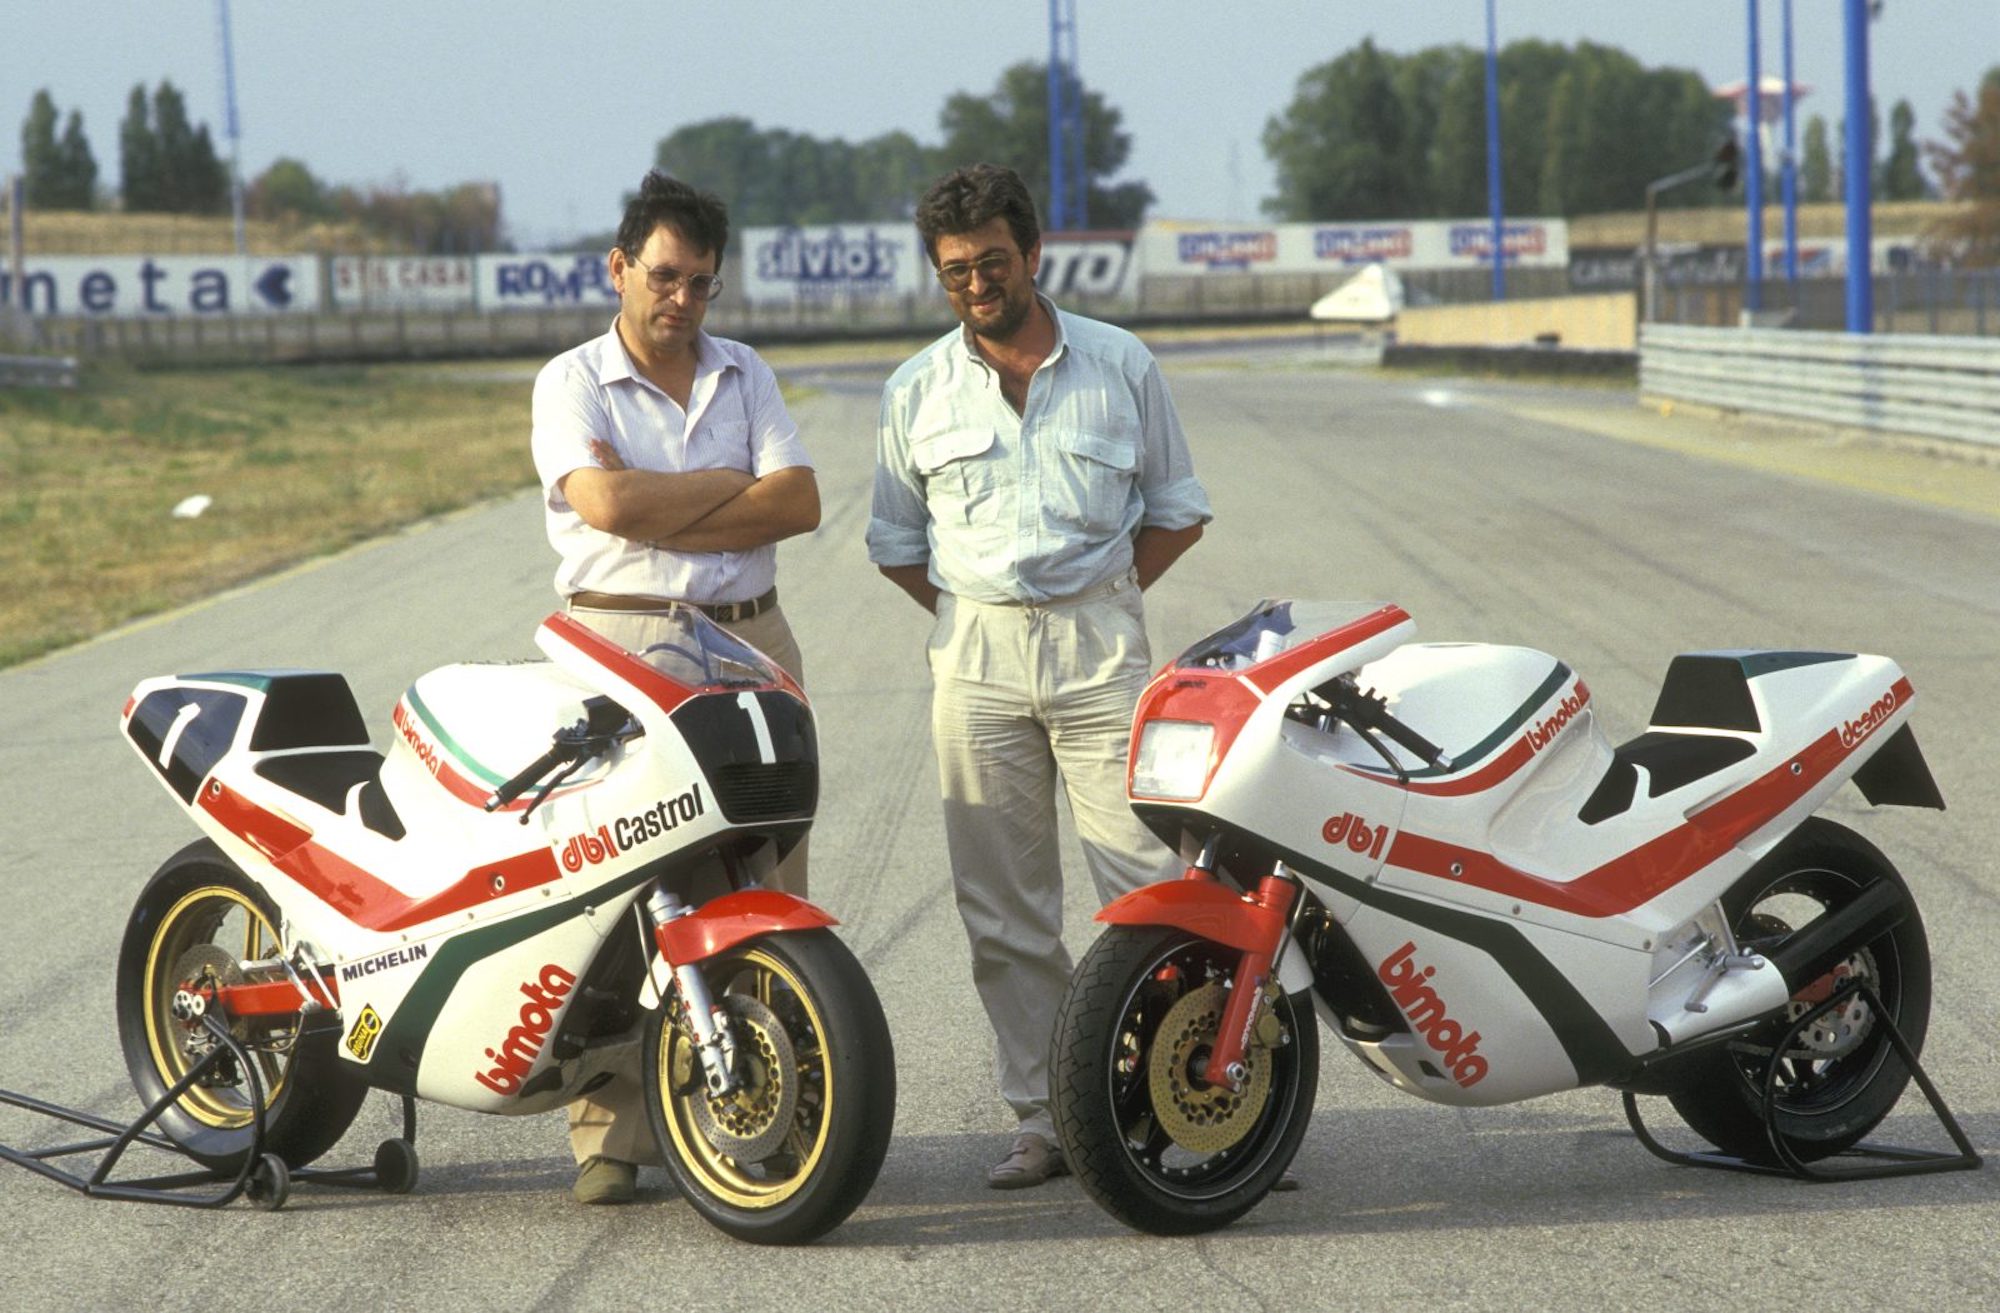 It's 1985; Martini and Giuseppe Morri pose next to the DB1. Media sourced from AMCN.